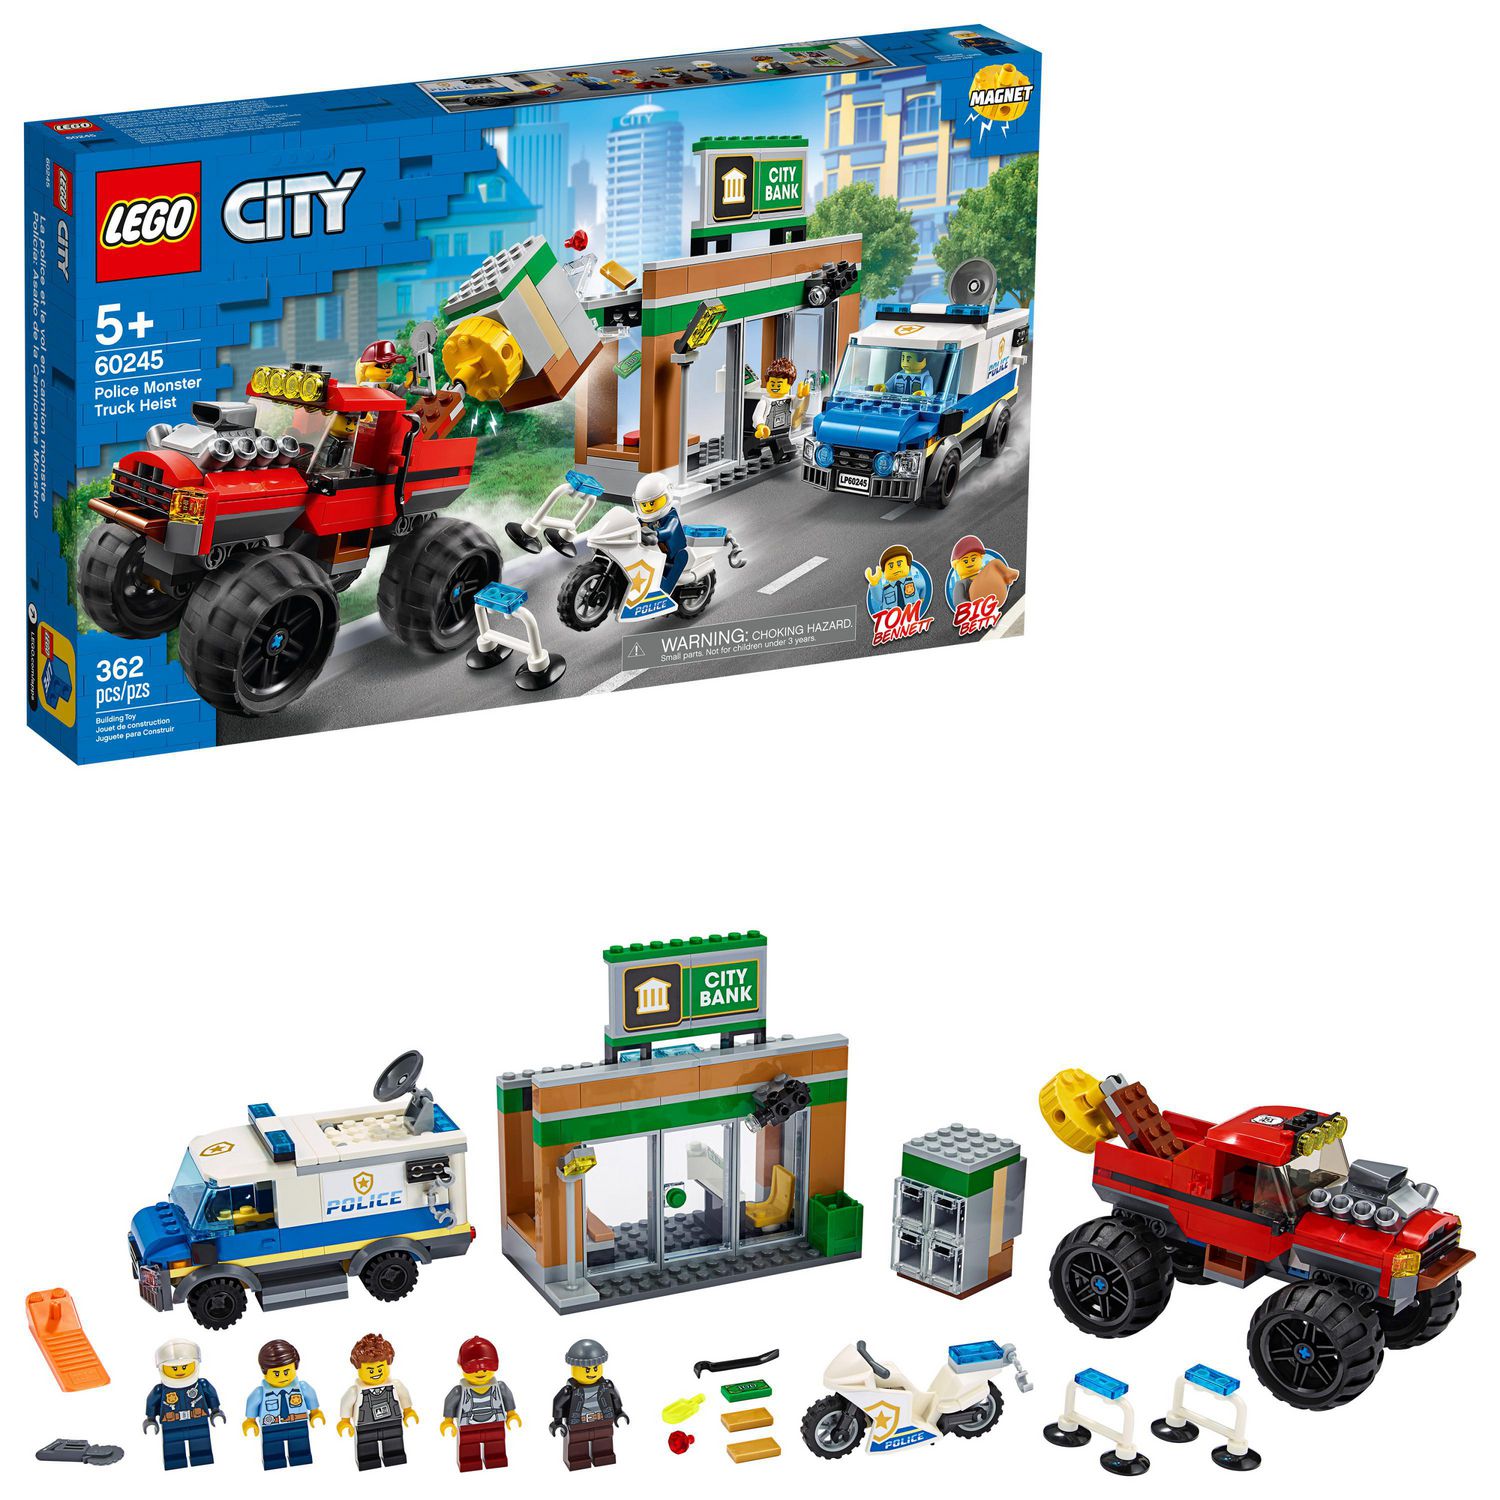 prins Antipoison humor LEGO City Police Monster Truck Heist 60245 Toy Building Kit (362 Pieces) |  Walmart Canada